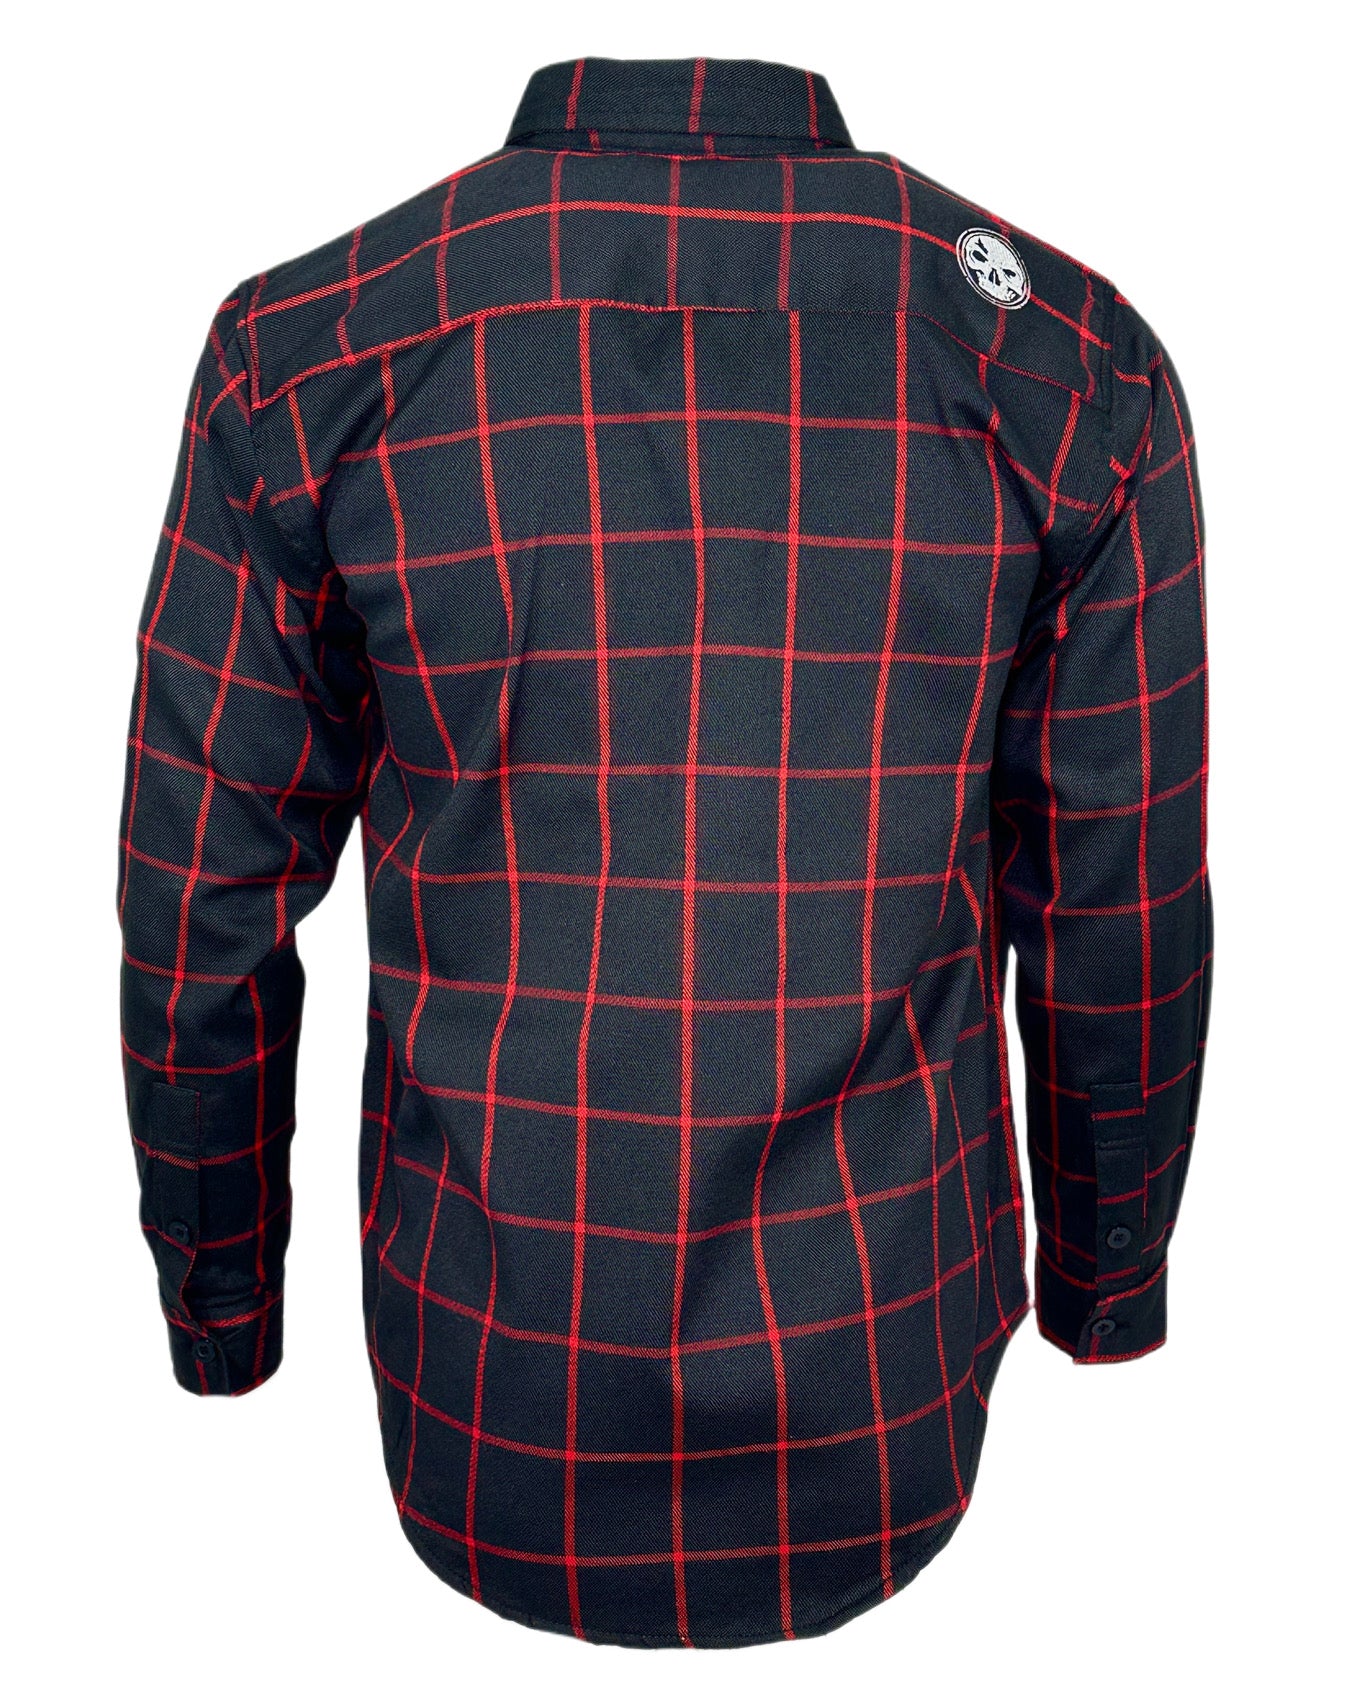 NEW! Black & Red Embroidered Flannel (Hidden Snap Collars)